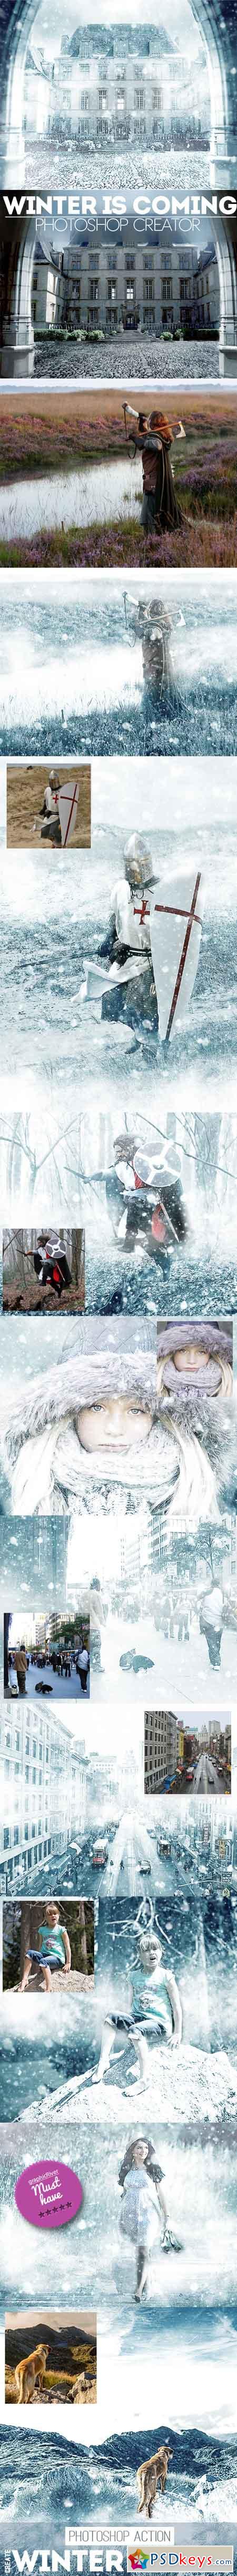 Winter is Coming Photoshop Snowing Effect Action 13828287